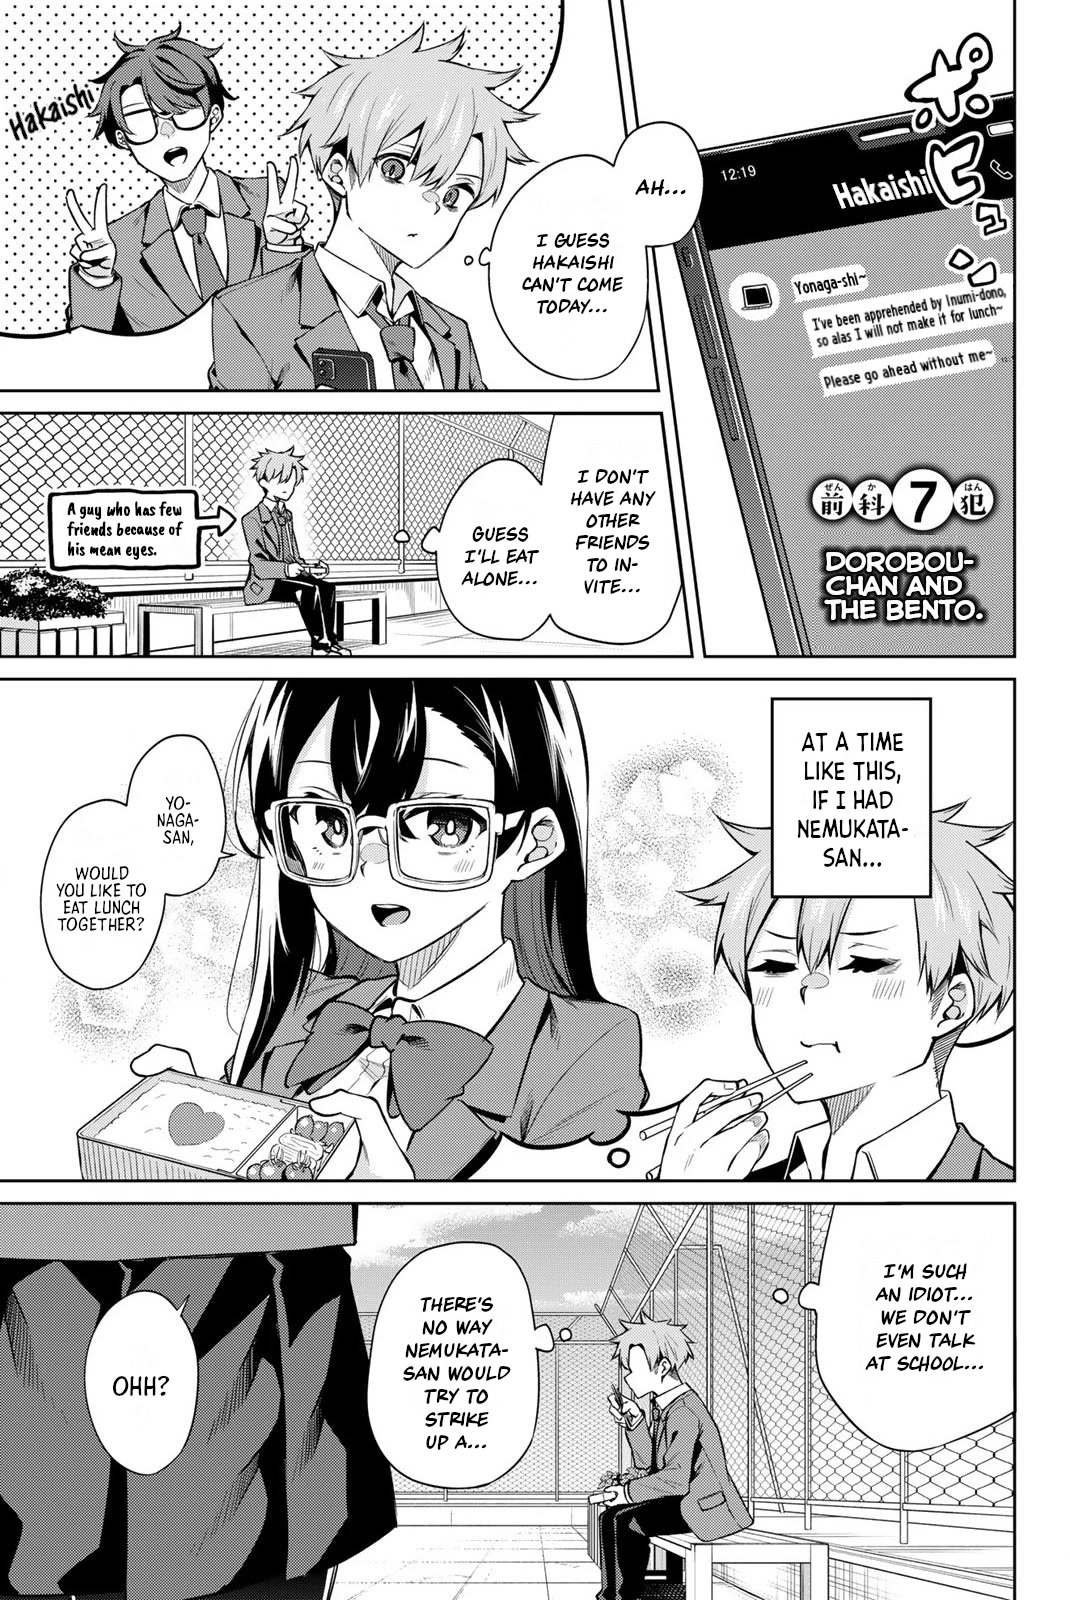 Dorobou-Chan Chapter 7: Dorobou-Chan And The Bento. - Picture 1